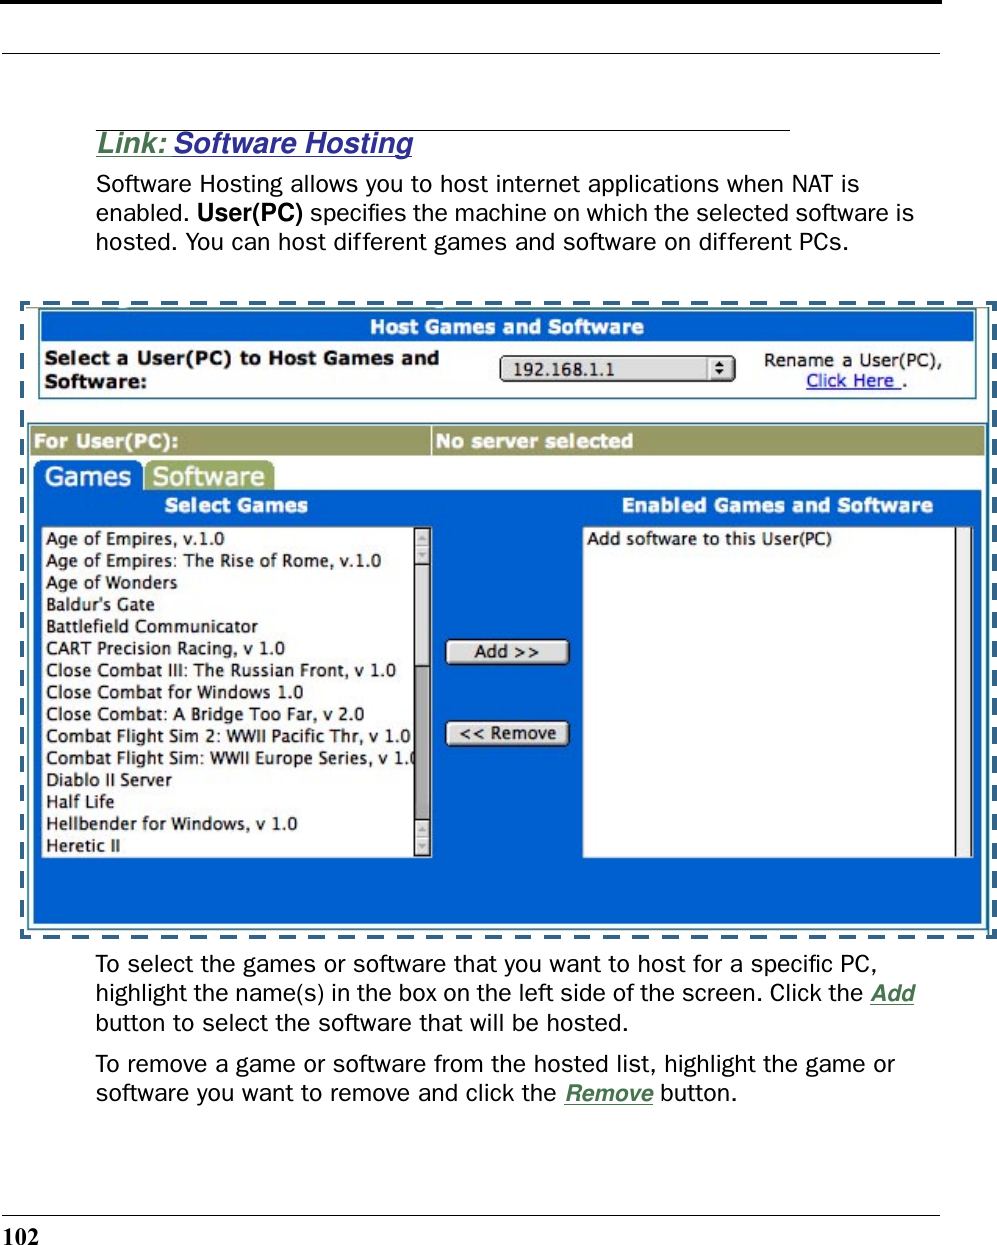 102Link: Software HostingSoftware Hosting allows you to host internet applications when NAT is enabled. User(PC) speciﬁes the machine on which the selected software is hosted. You can host different games and software on different PCs.To select the games or software that you want to host for a speciﬁc PC, highlight the name(s) in the box on the left side of the screen. Click the Add button to select the software that will be hosted.To remove a game or software from the hosted list, highlight the game or software you want to remove and click the Remove button.